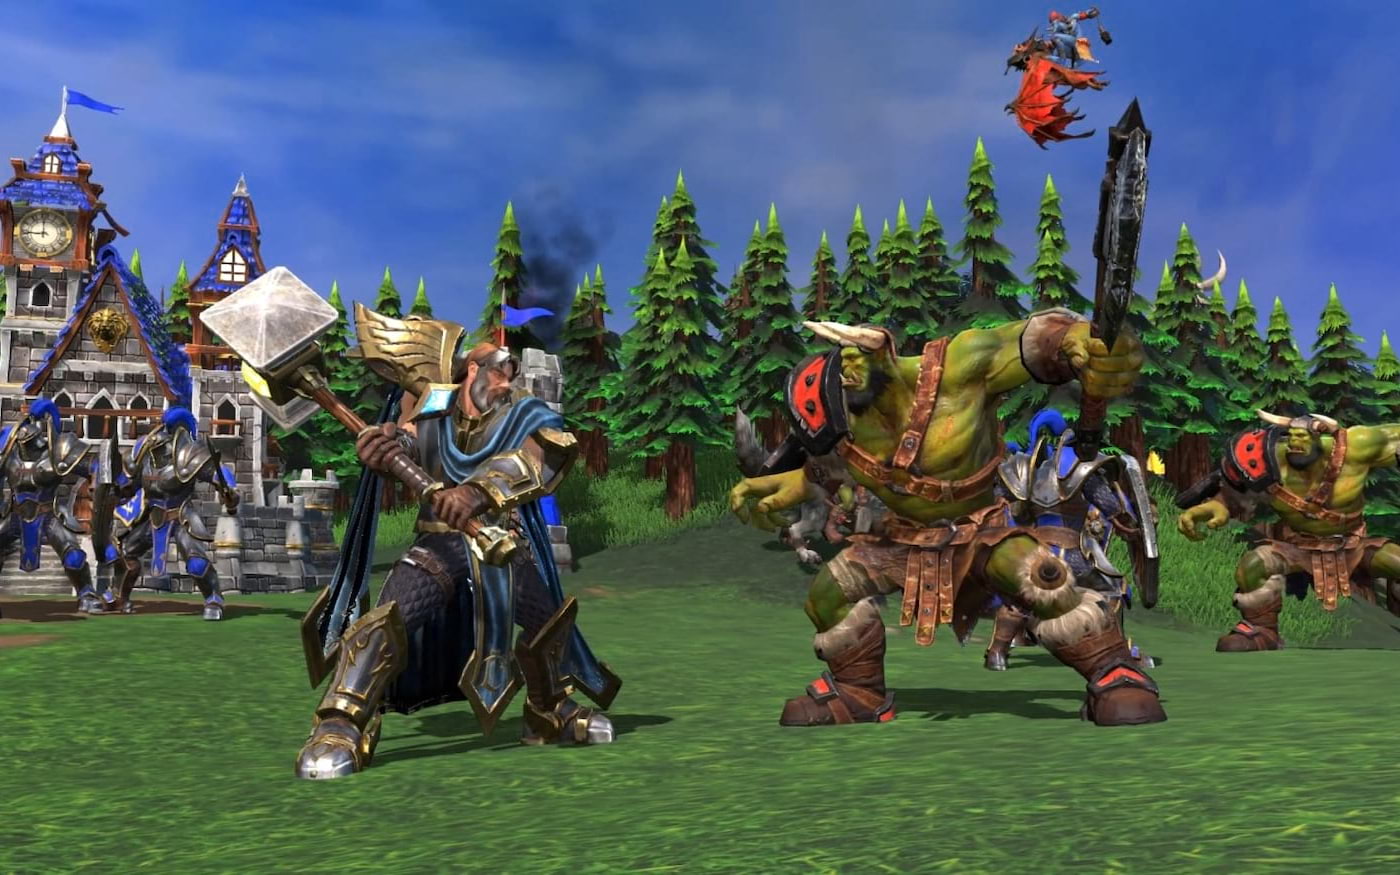 Warcraft 3 Reforged disappoints players and has the lowest score of all on Metacritic